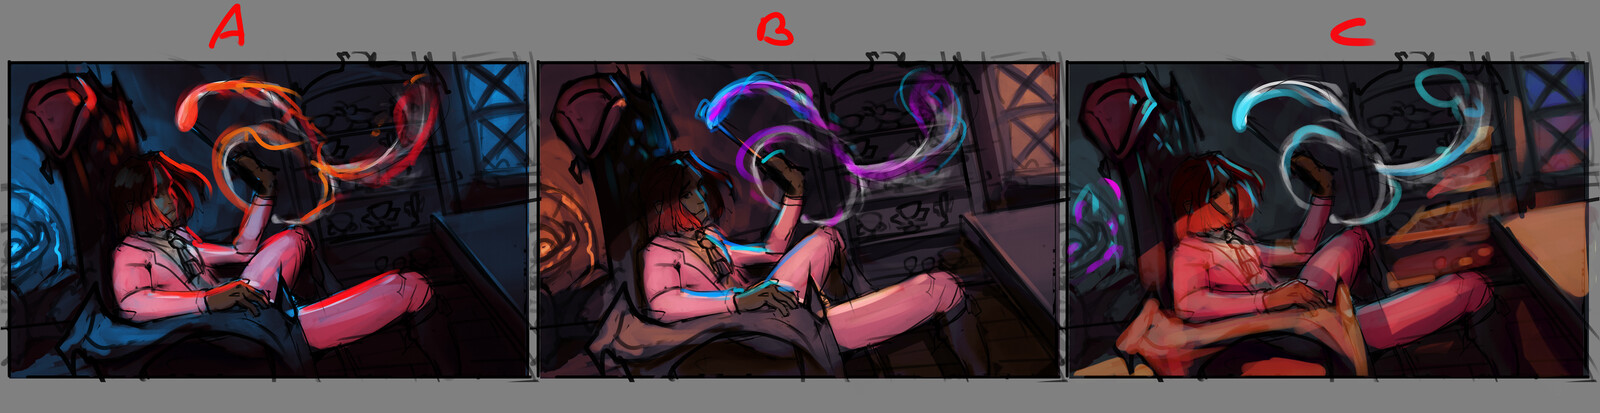 color thumbnails. client chose C with fire trail from A